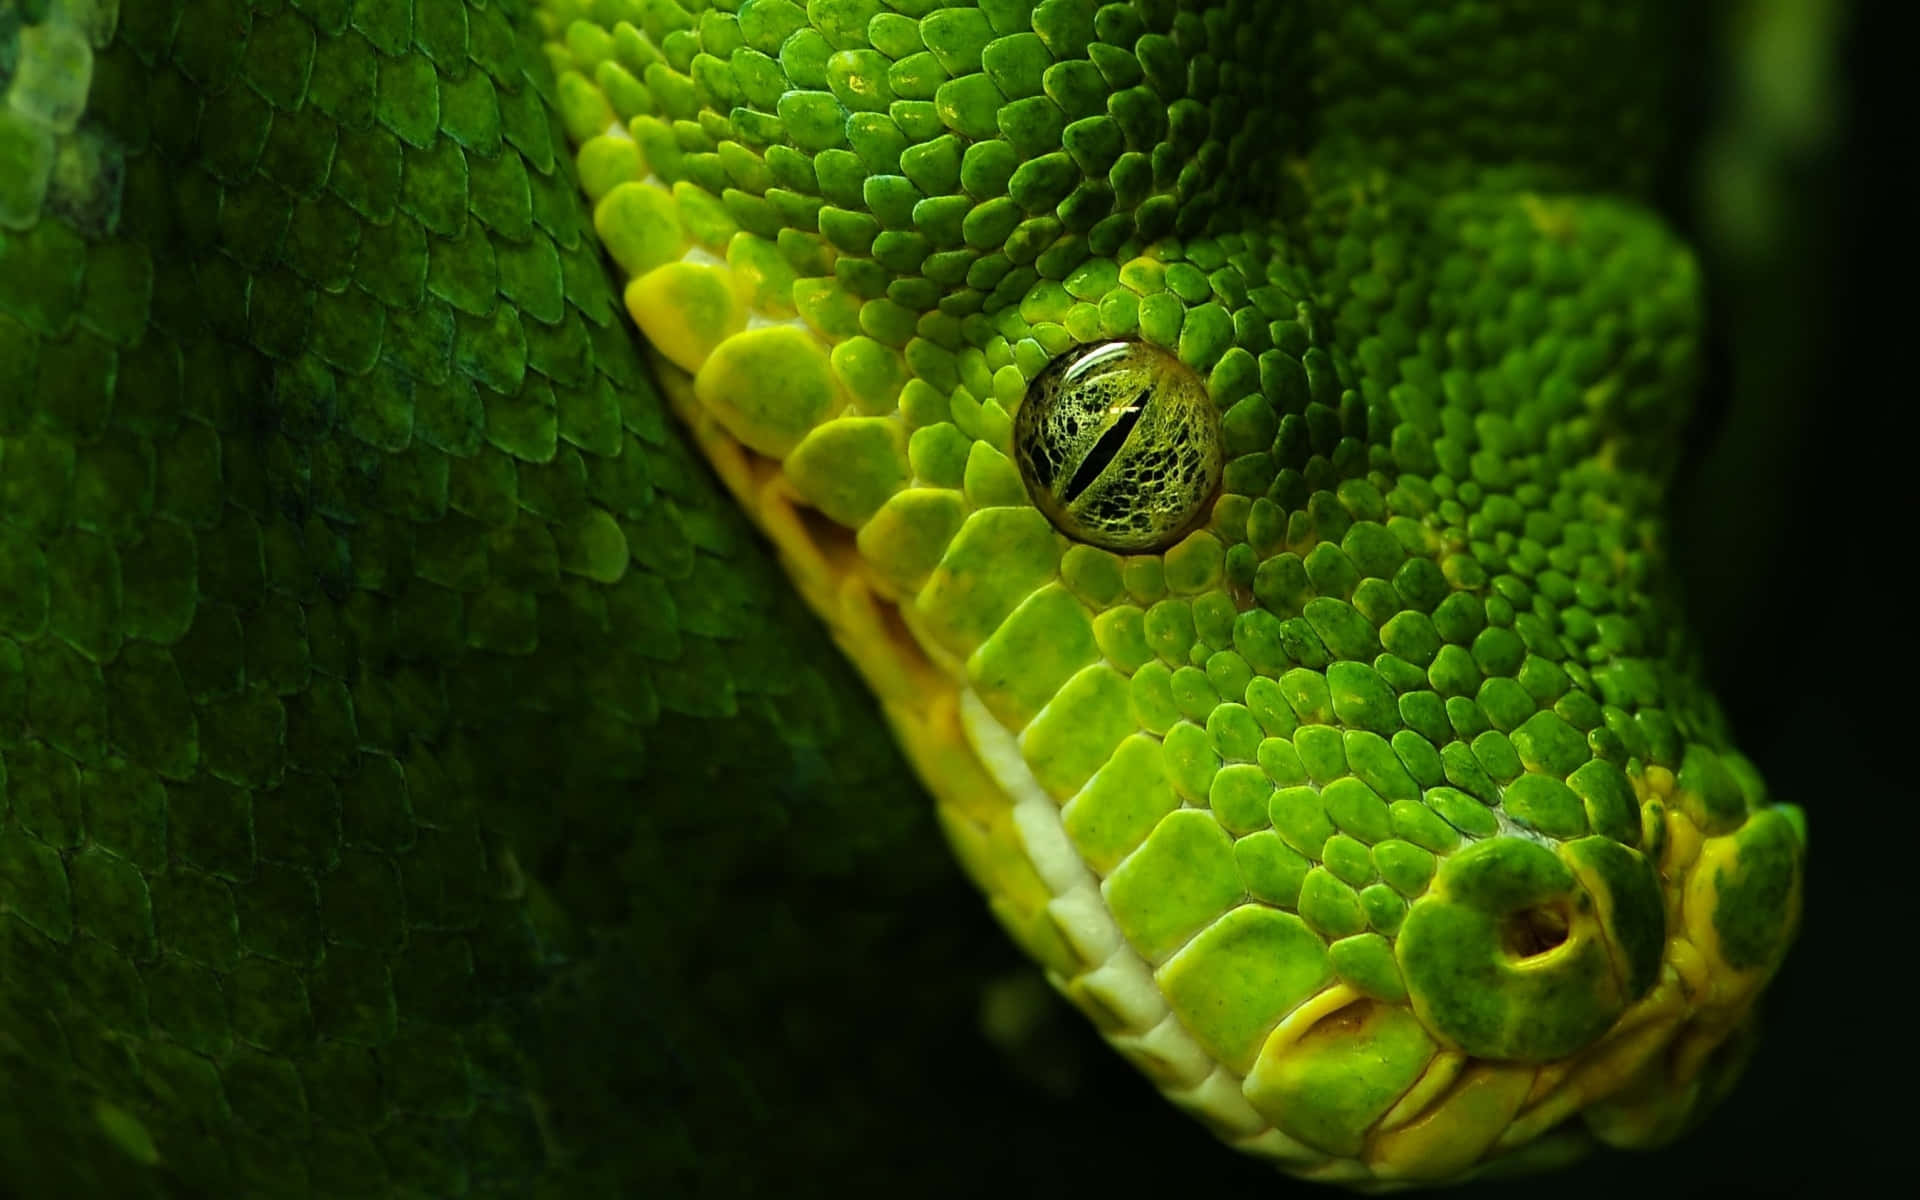 This Coiled Cool Snake Glistens Under The Bright Sunlight. Background